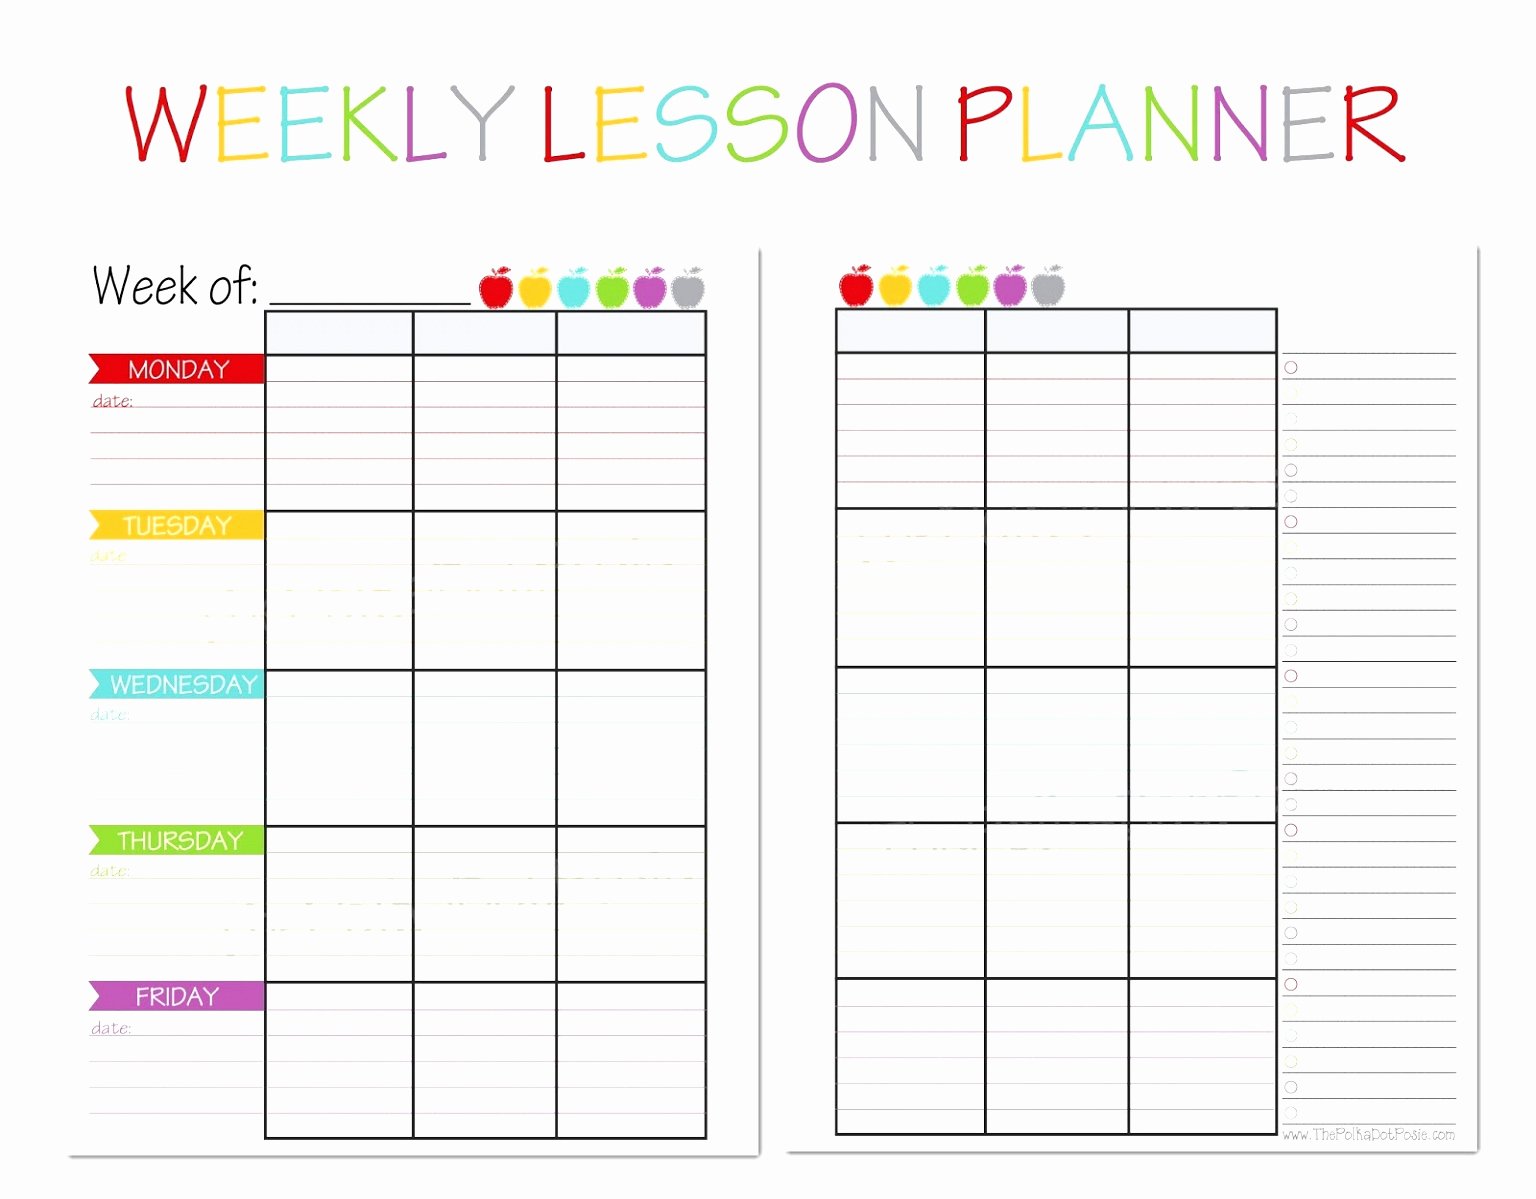 Weekly Lesson Plan Template Pdf Unique 10 Weekly Lesson Plan Templates for Elementary Teachers